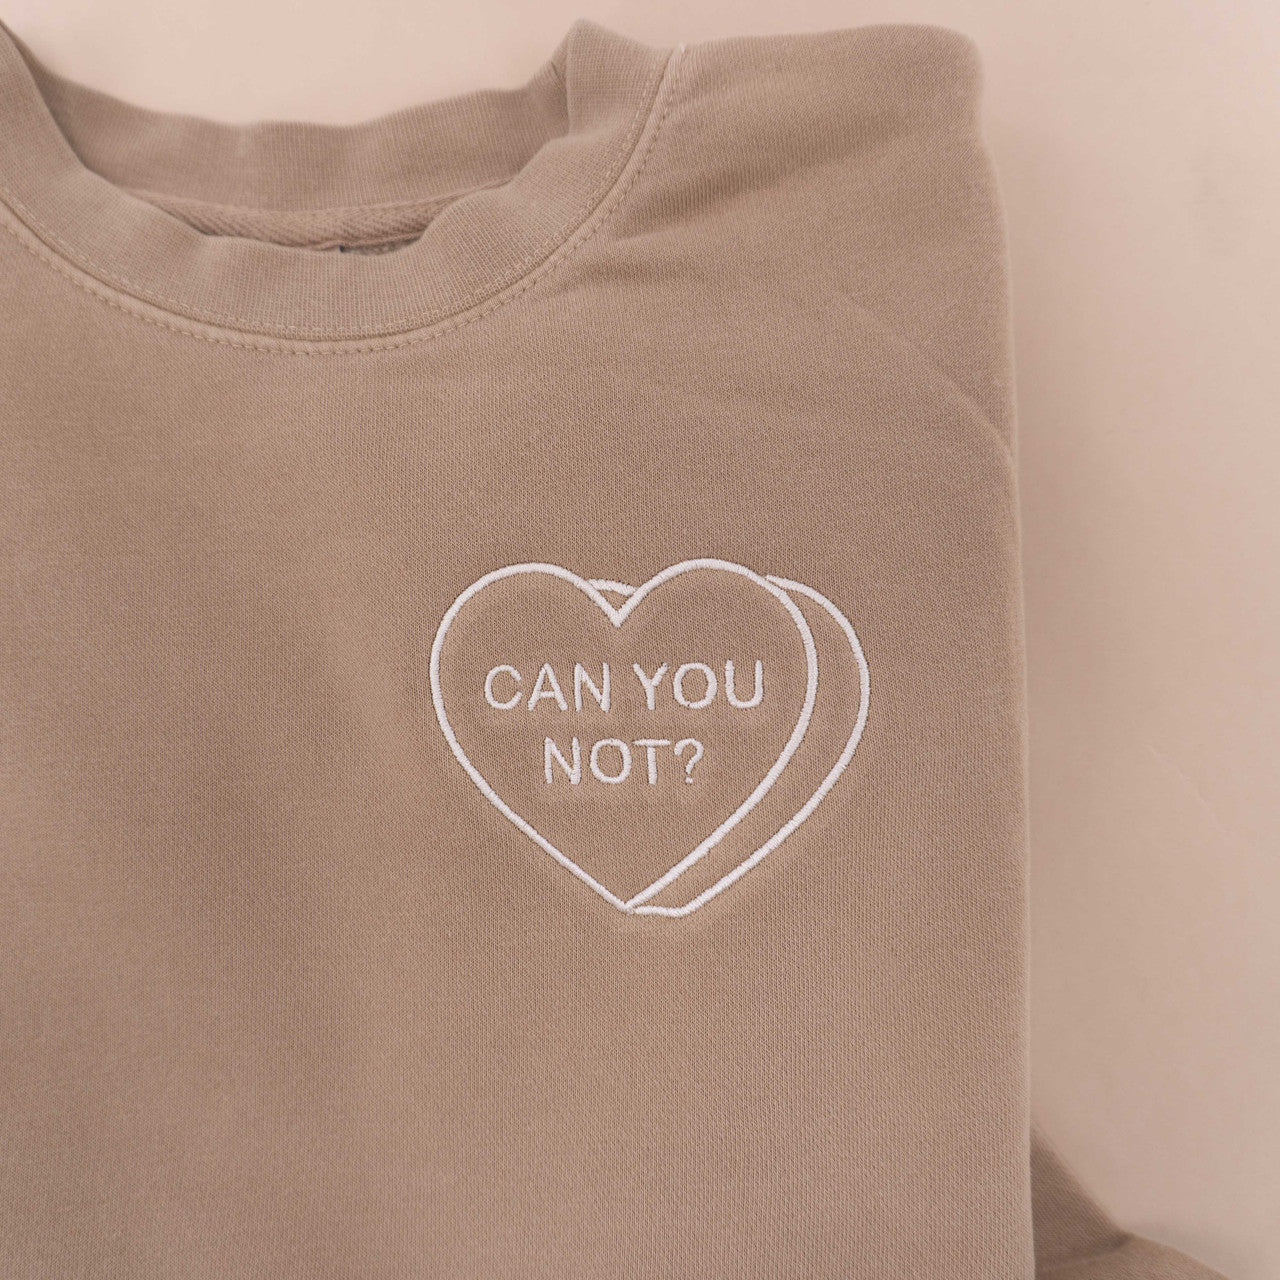 Can You Not? - Embroidered Sweatshirt (Tan)